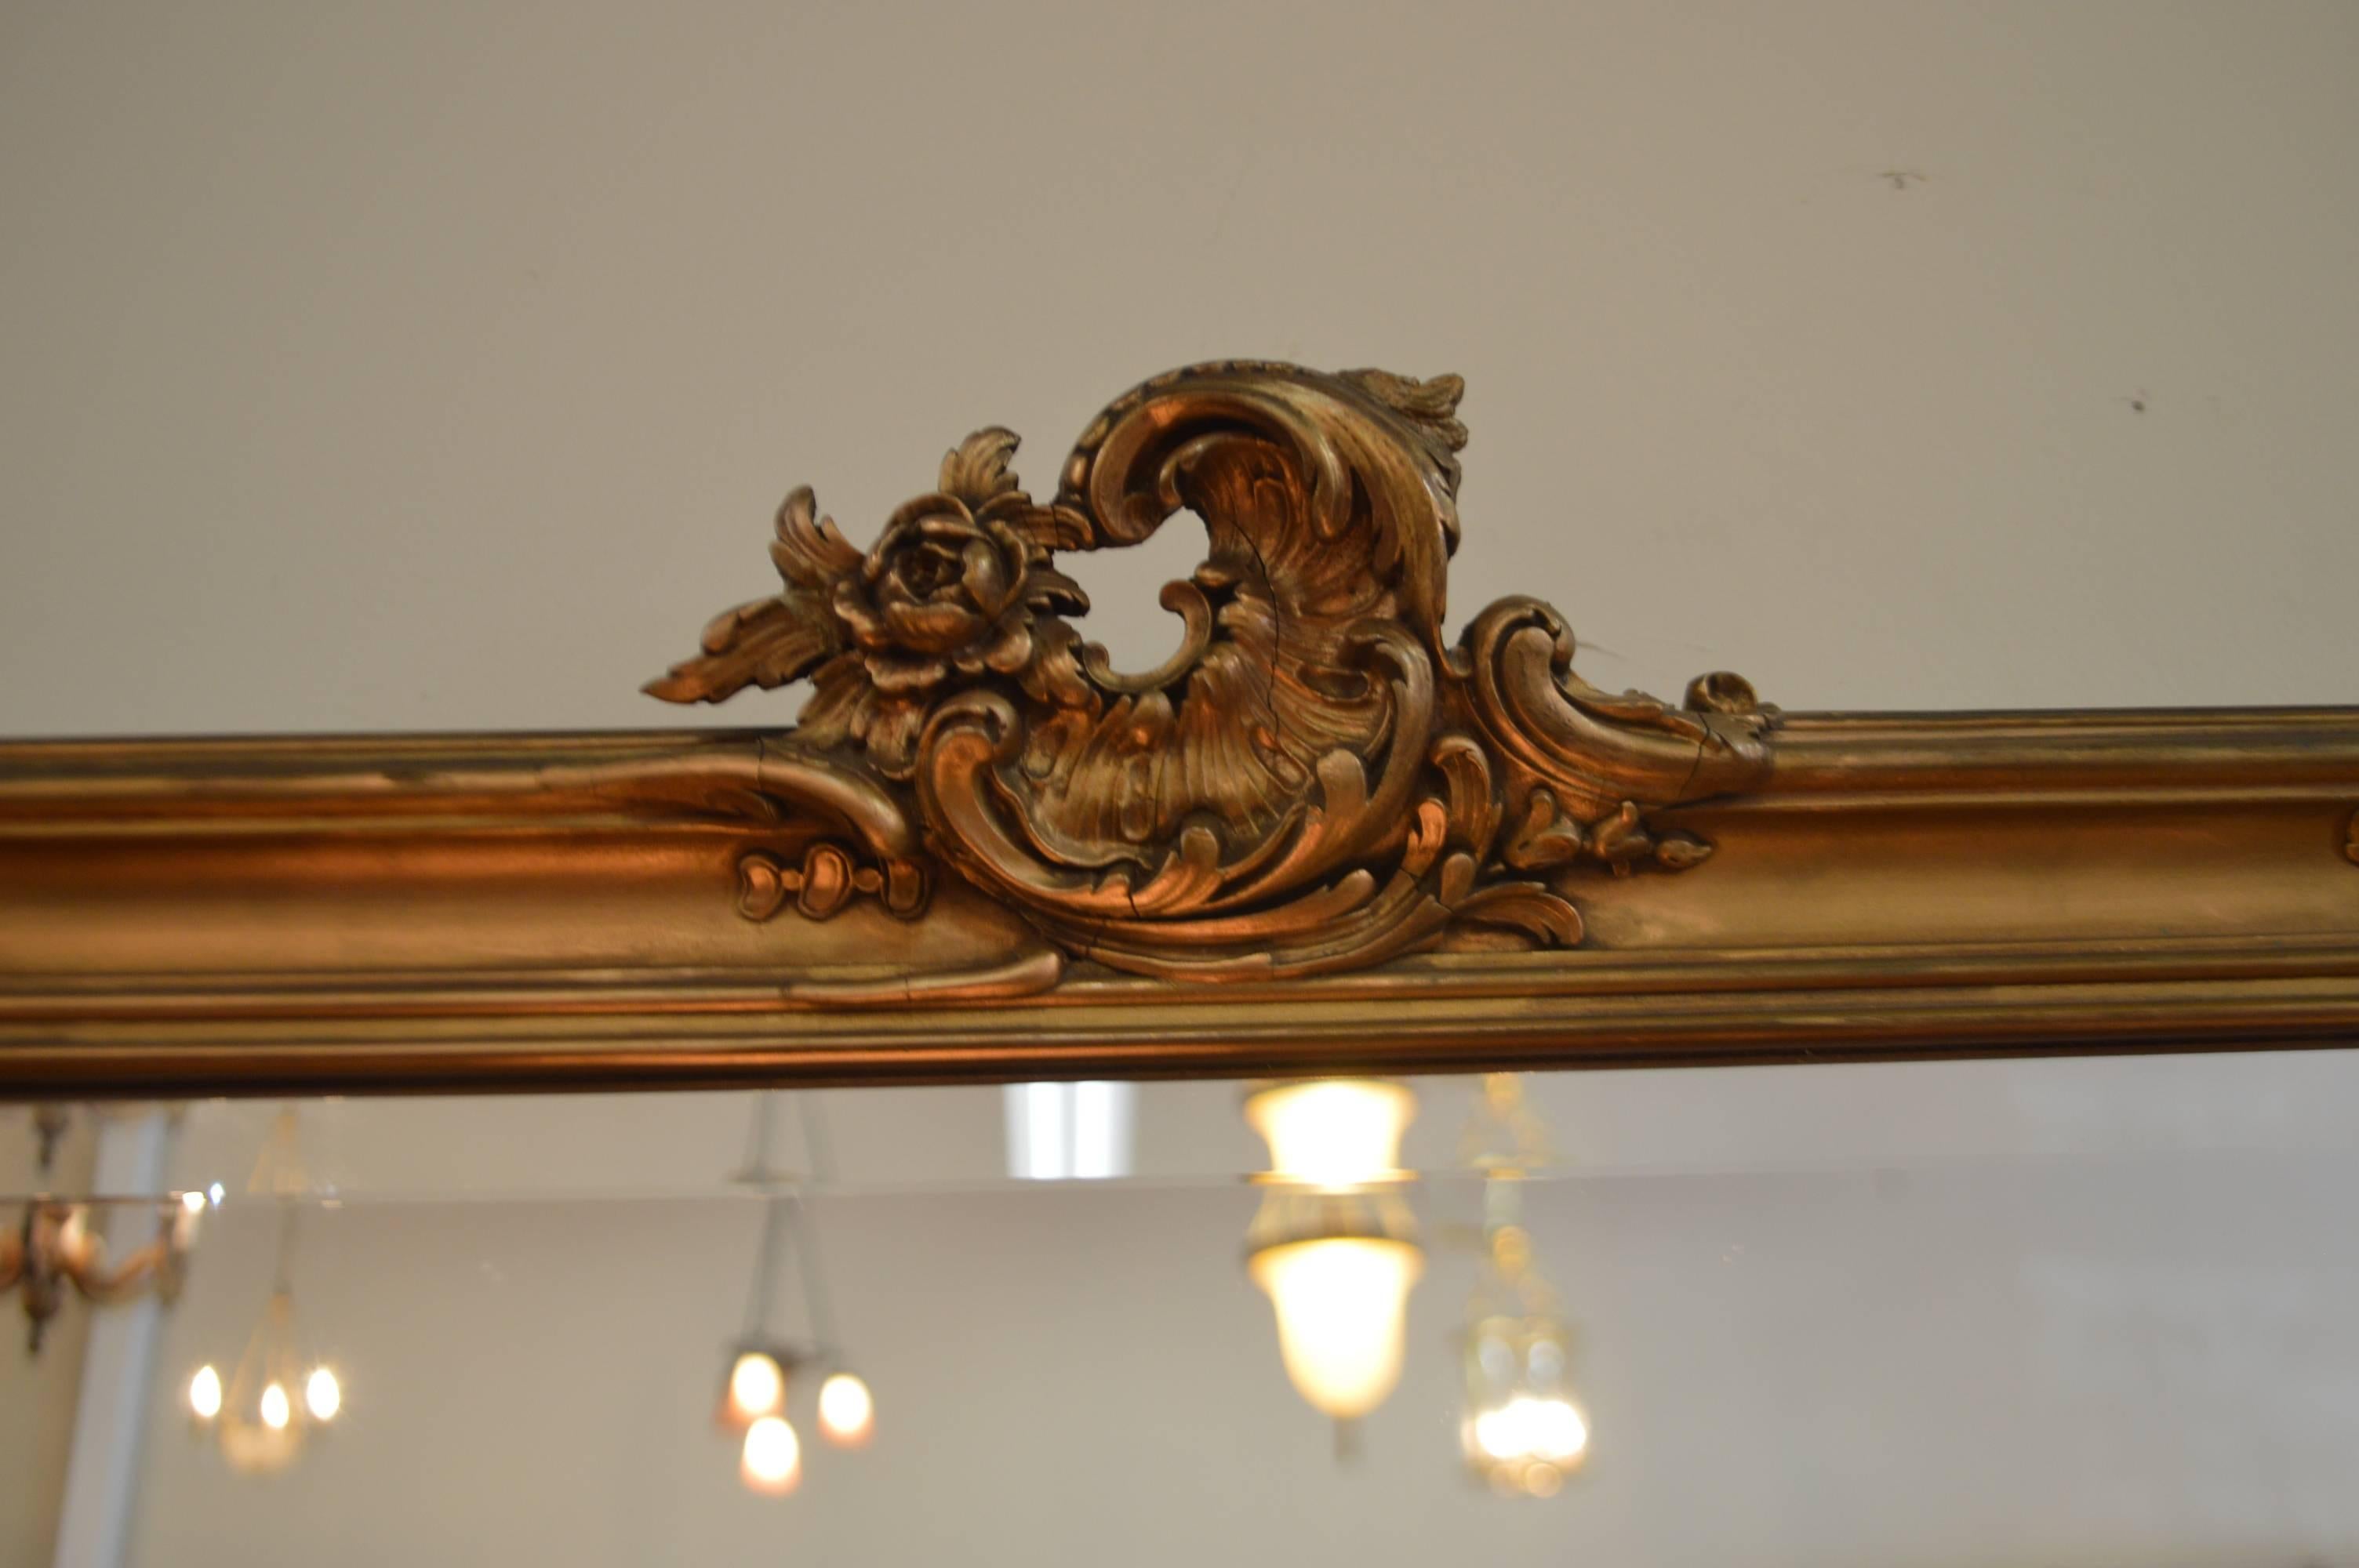 New beveled mirror was inserted in the hand-carved details Louis XV style gilded mirror. All repairs needed were done, there are no loose pieces on the carving elements of this mirror.